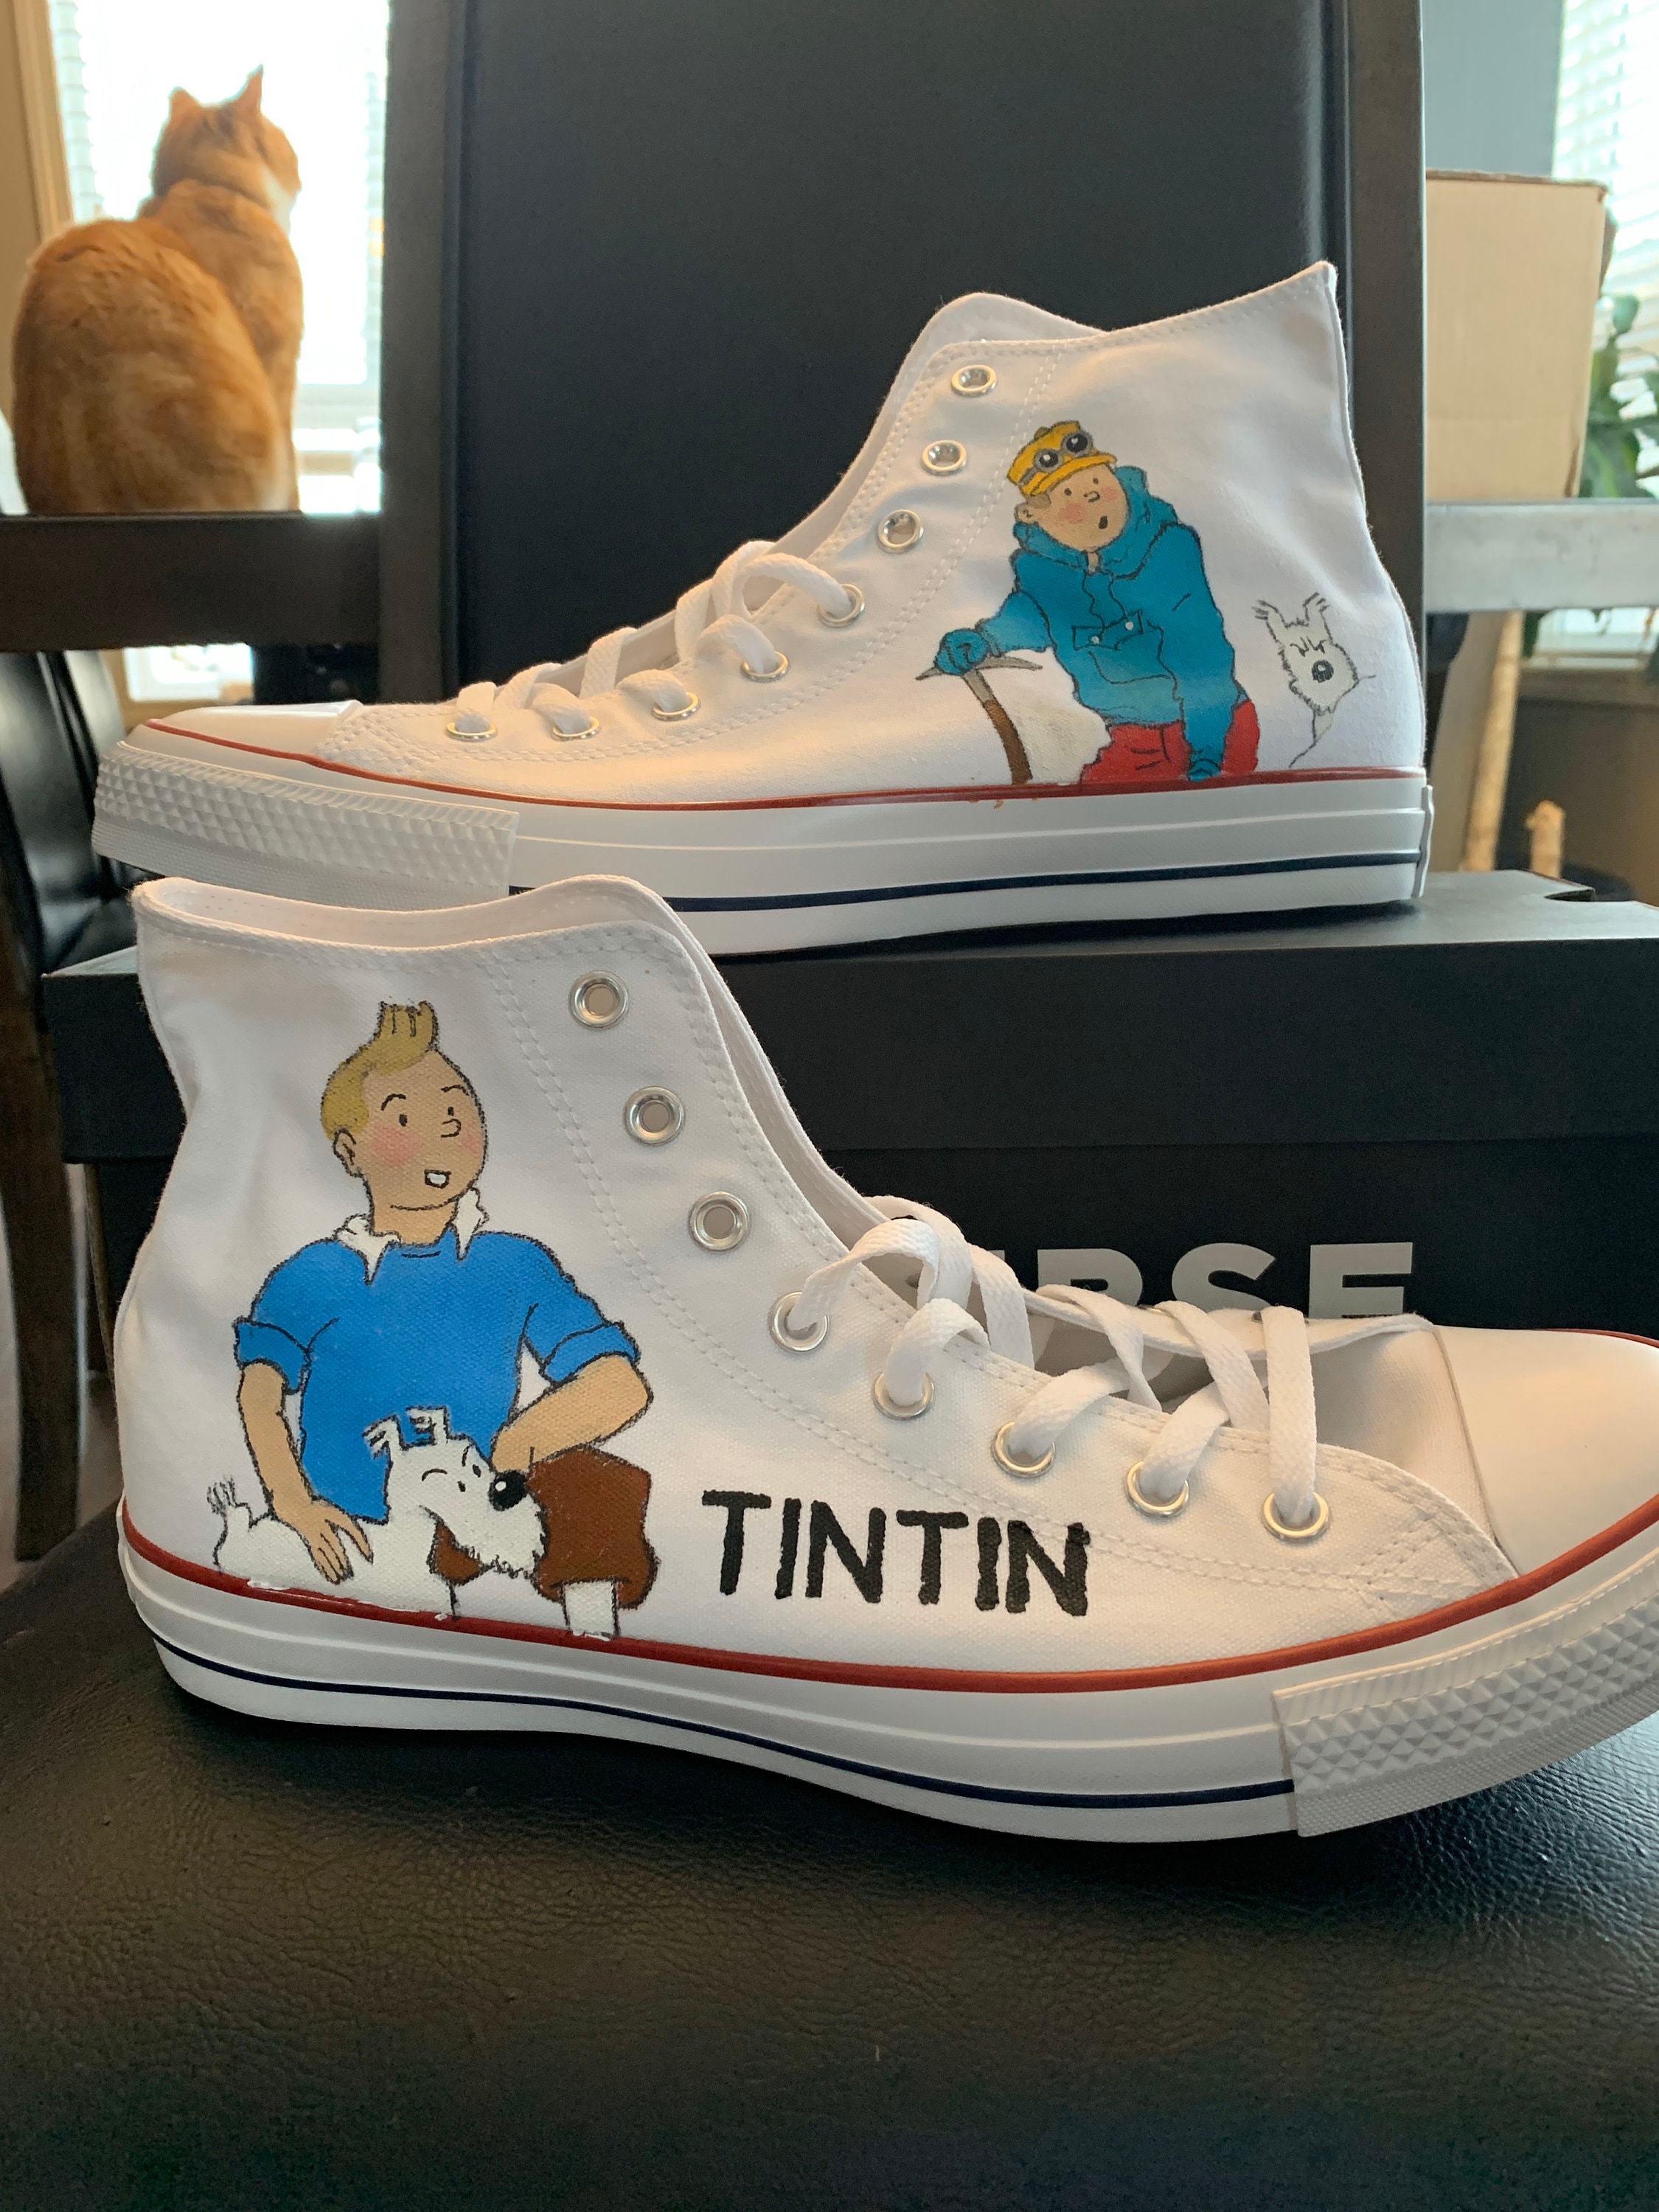 Painted Converse Hi-tops Inspired by Tintin Snowy - Etsy Norway